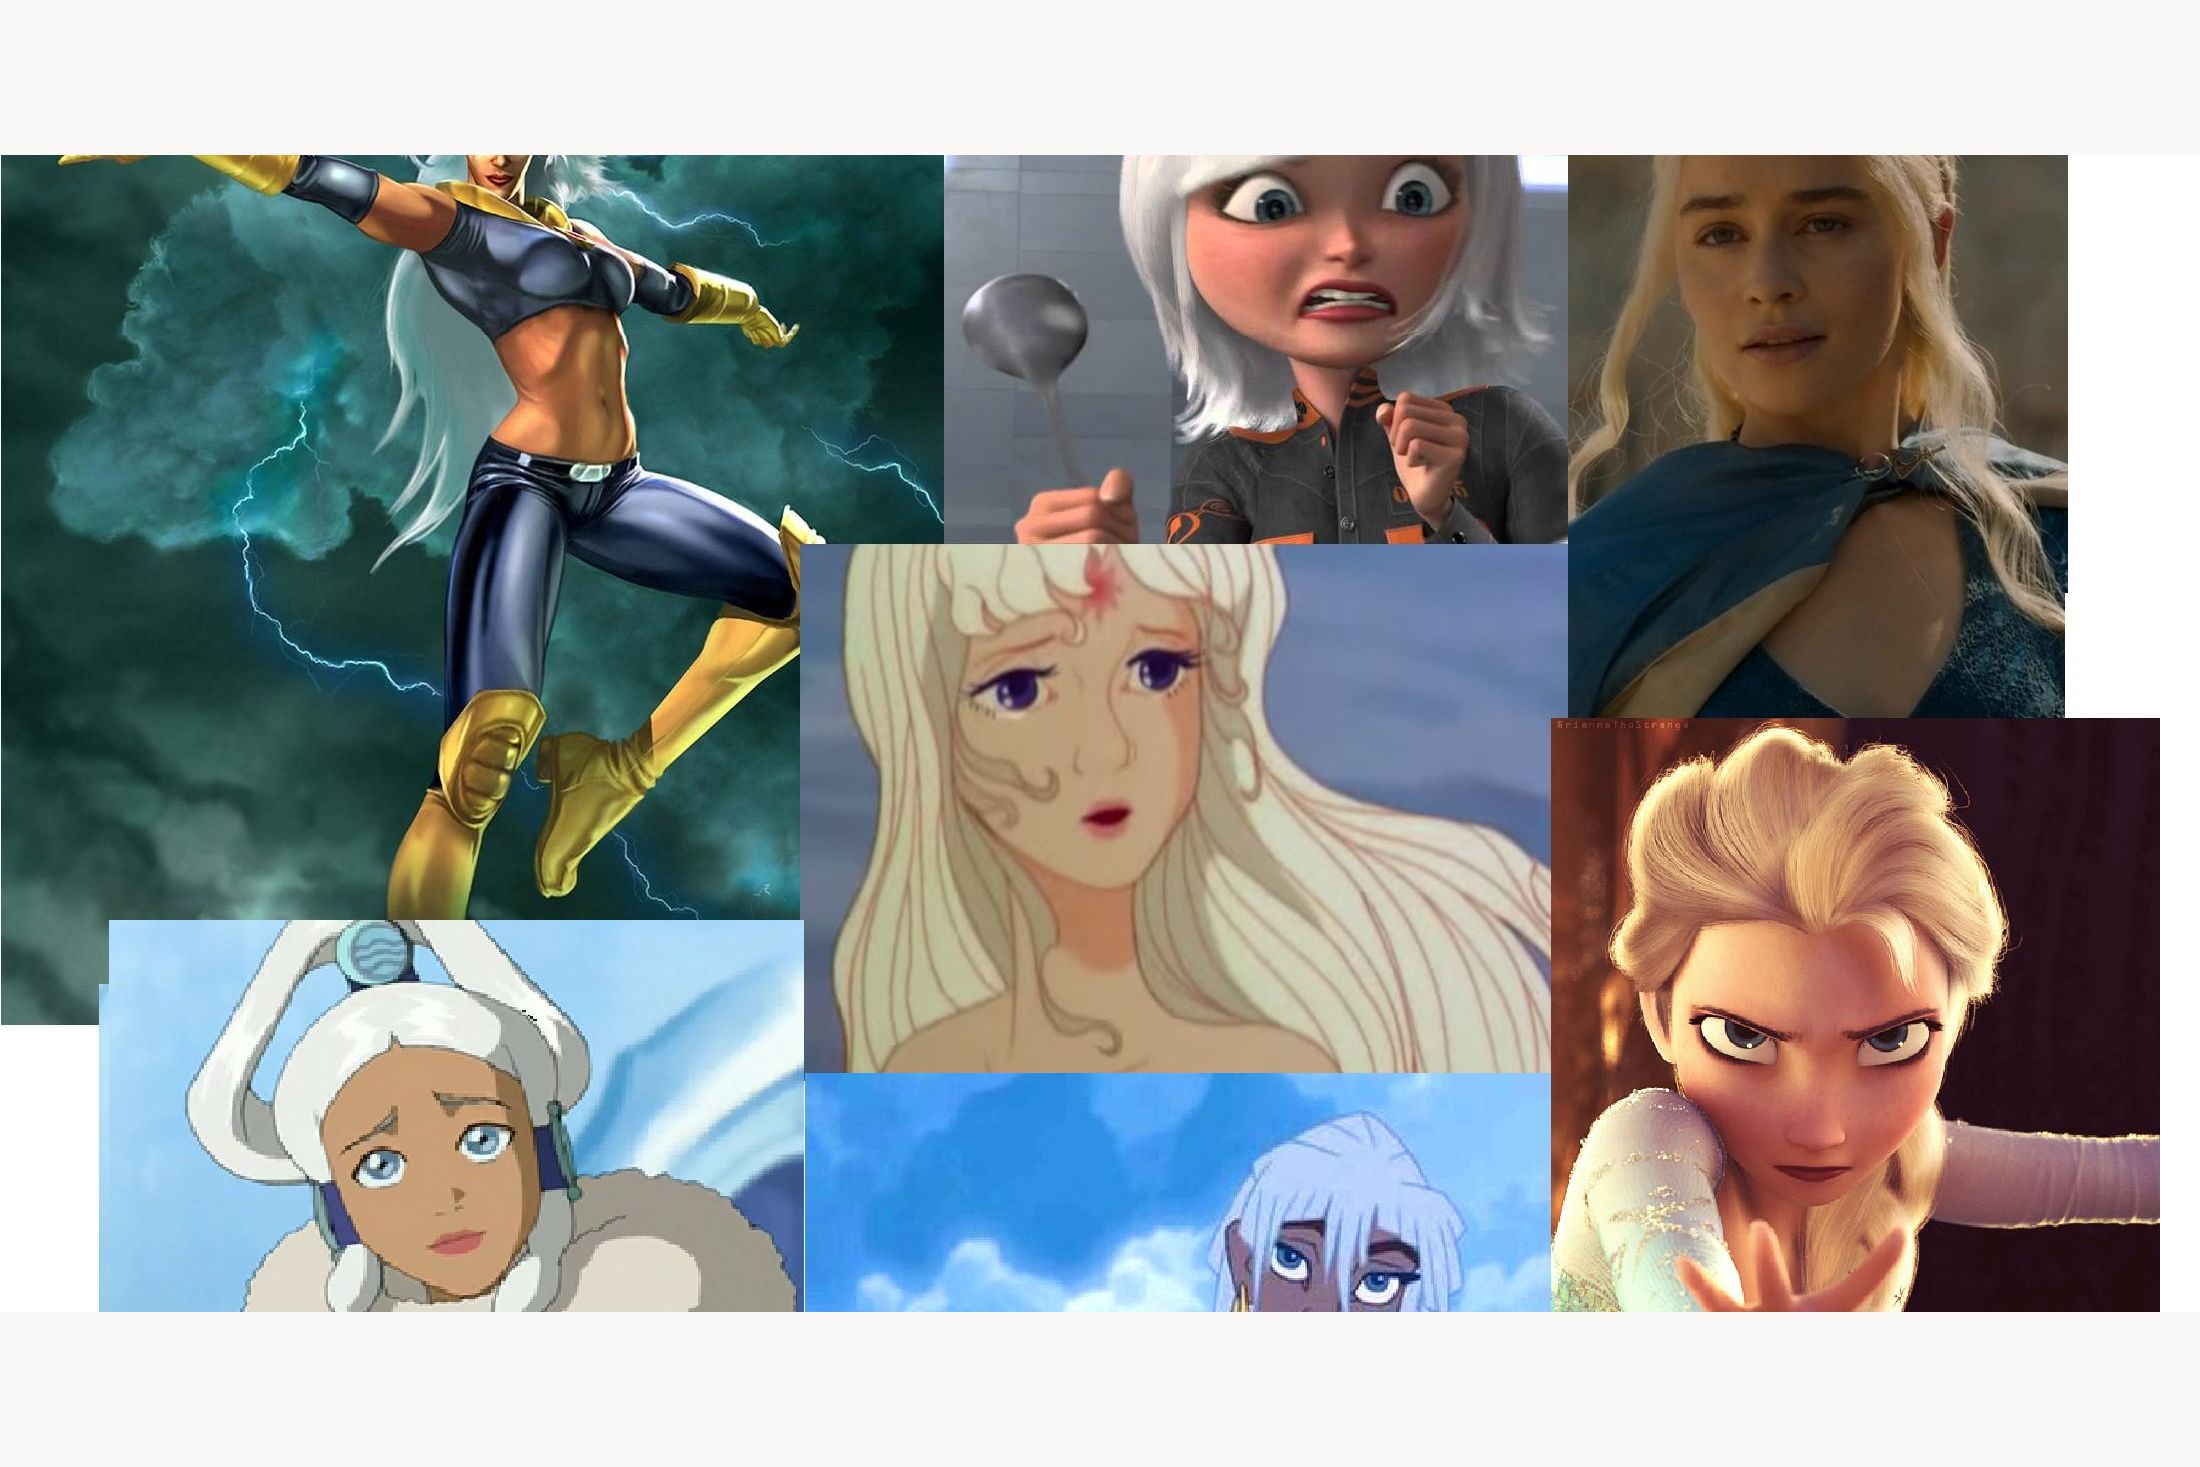 What White-Haired Character Are You? Girl Version